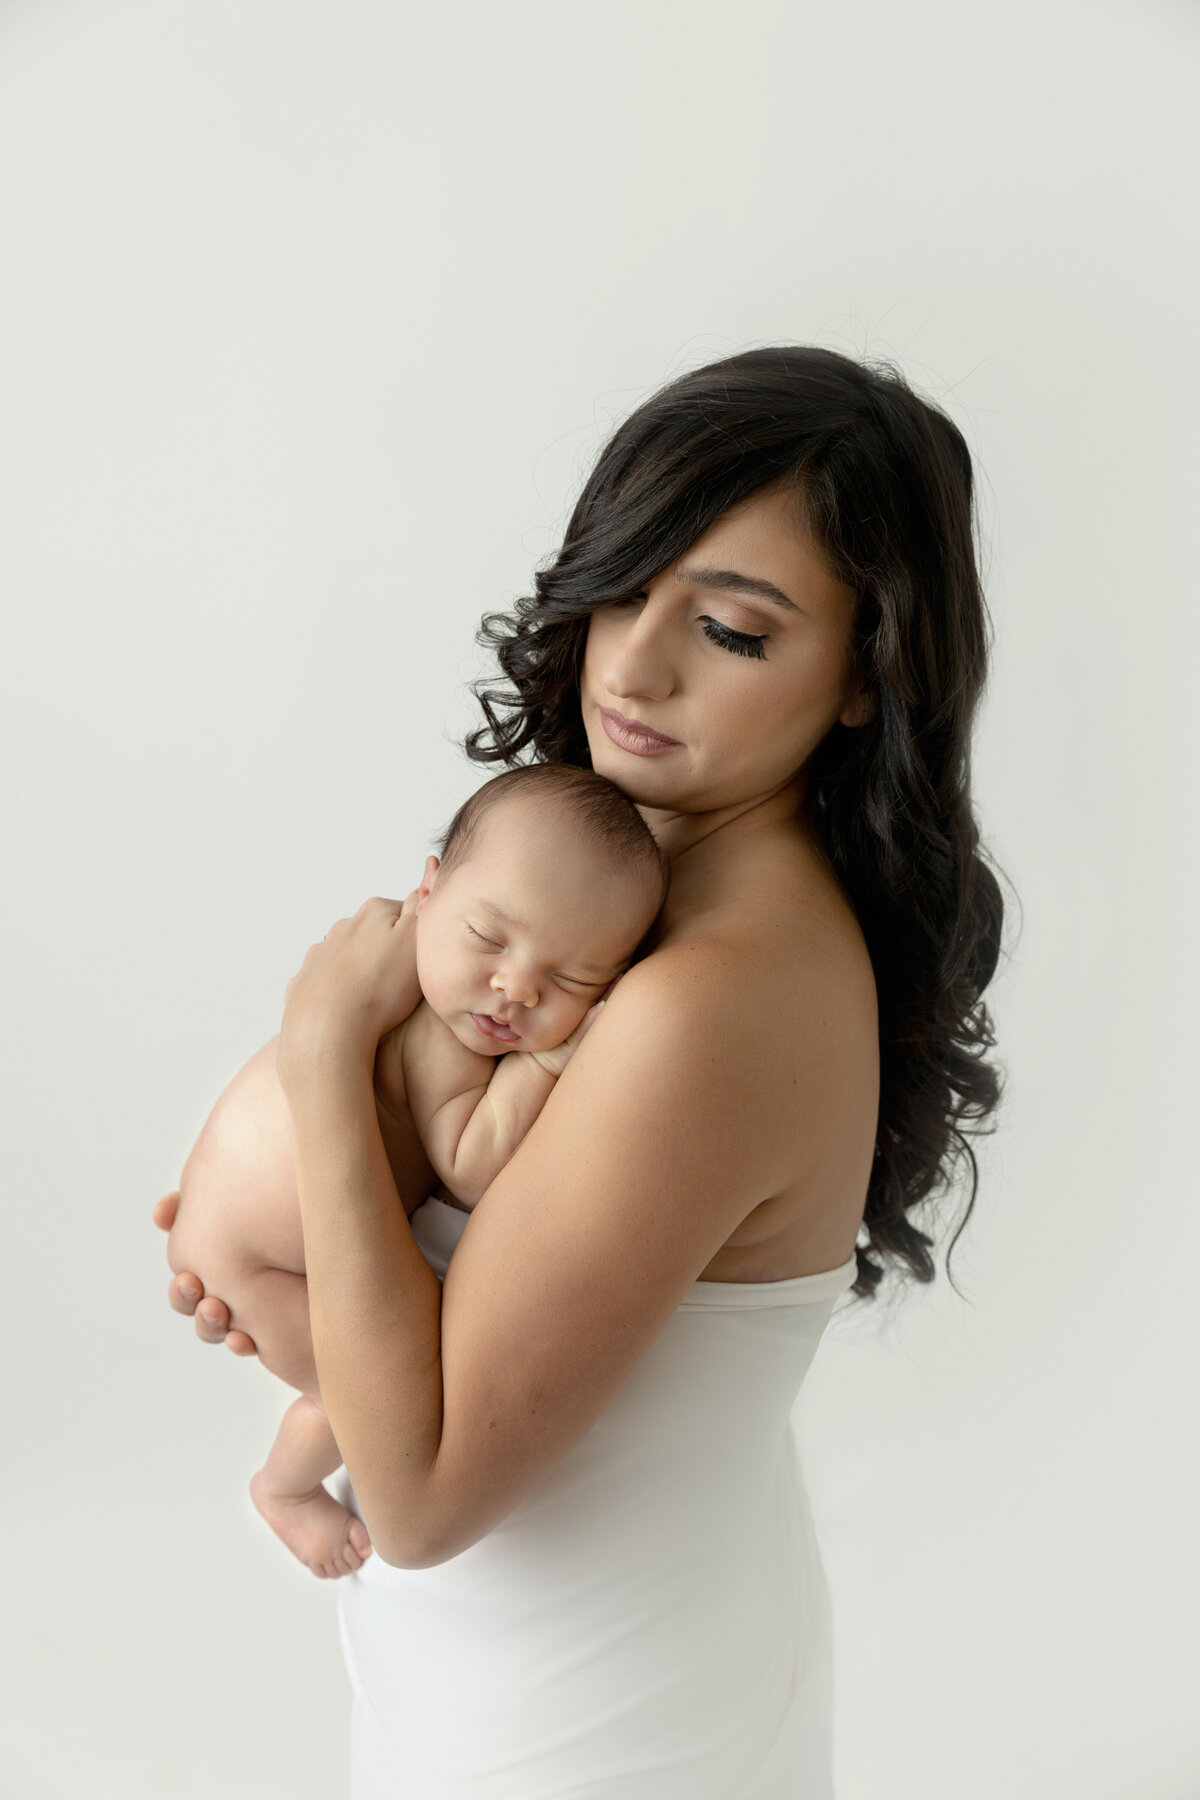 A mother in a white silk dress stands in a studio holding her sleeping newborn baby against her chest